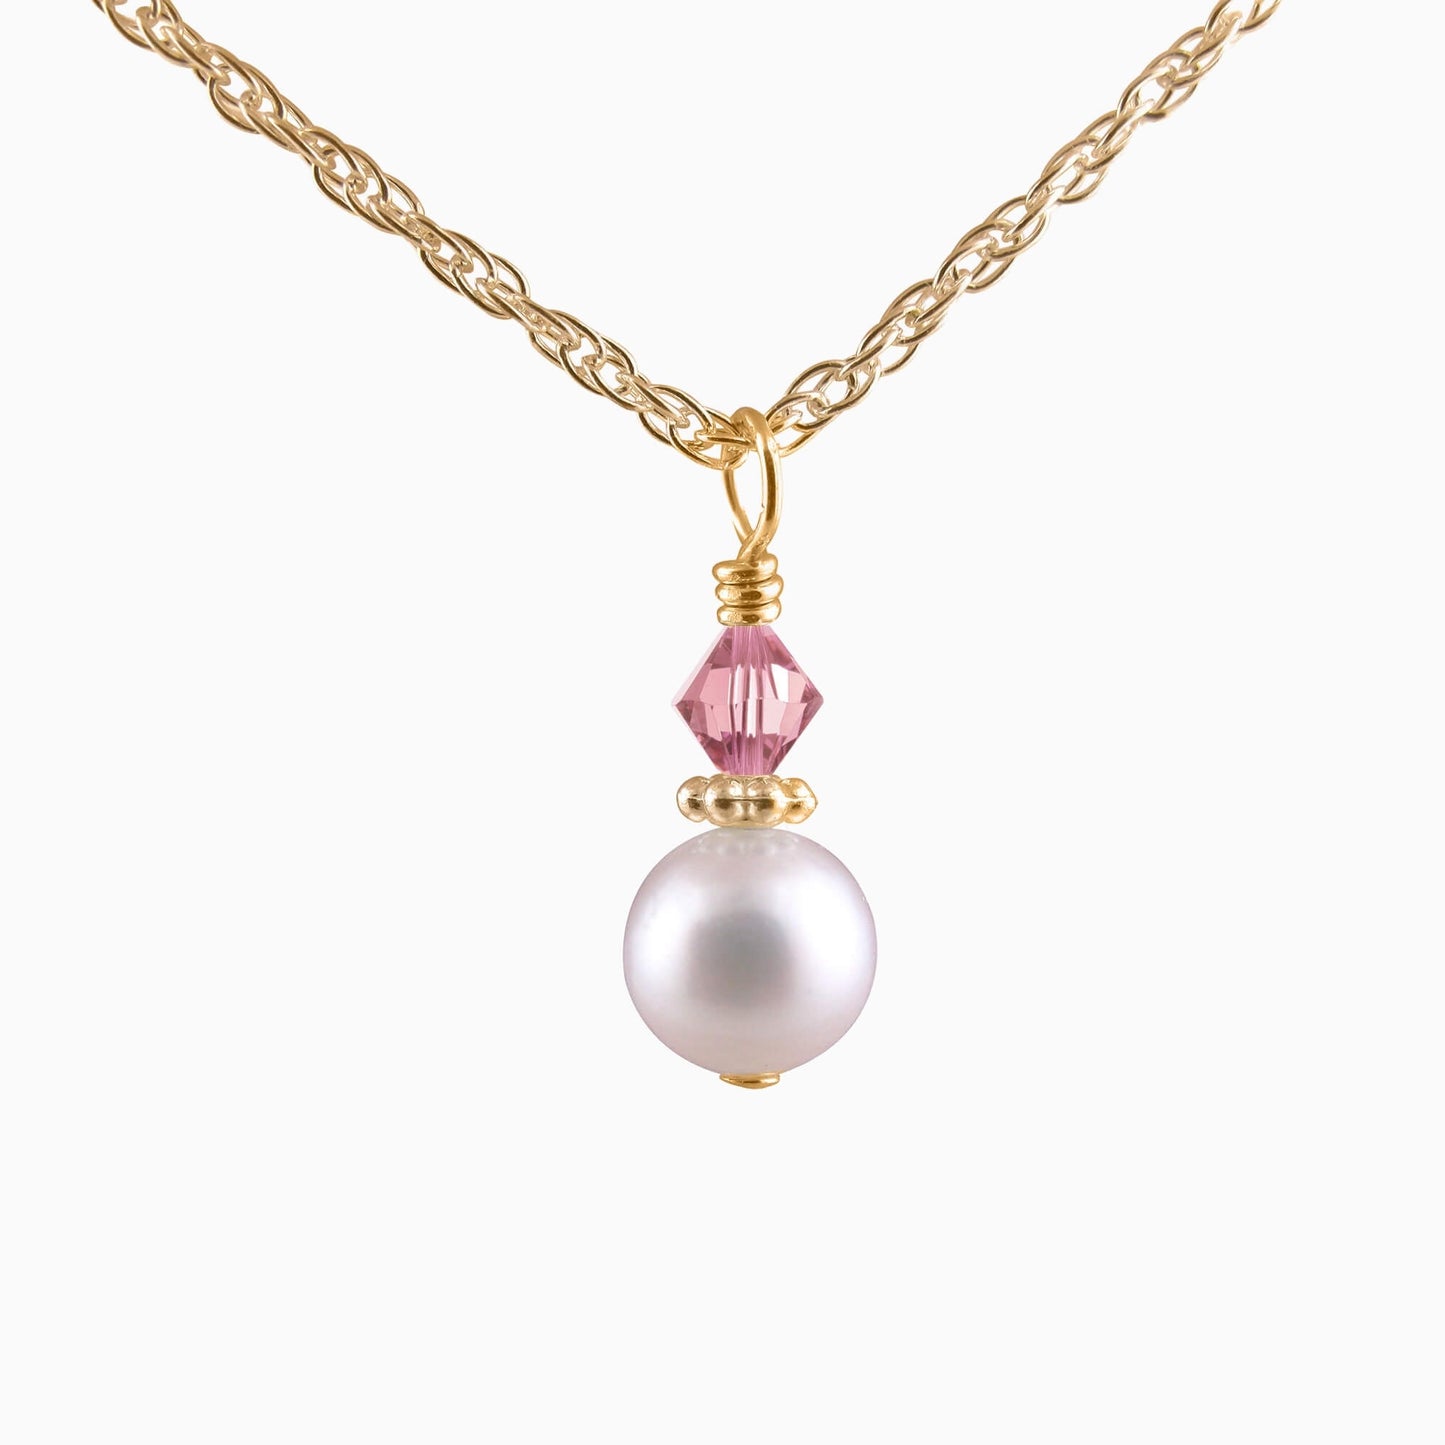 Darling My Keepsake Pearl + Crystal Necklace in Gold-Filled